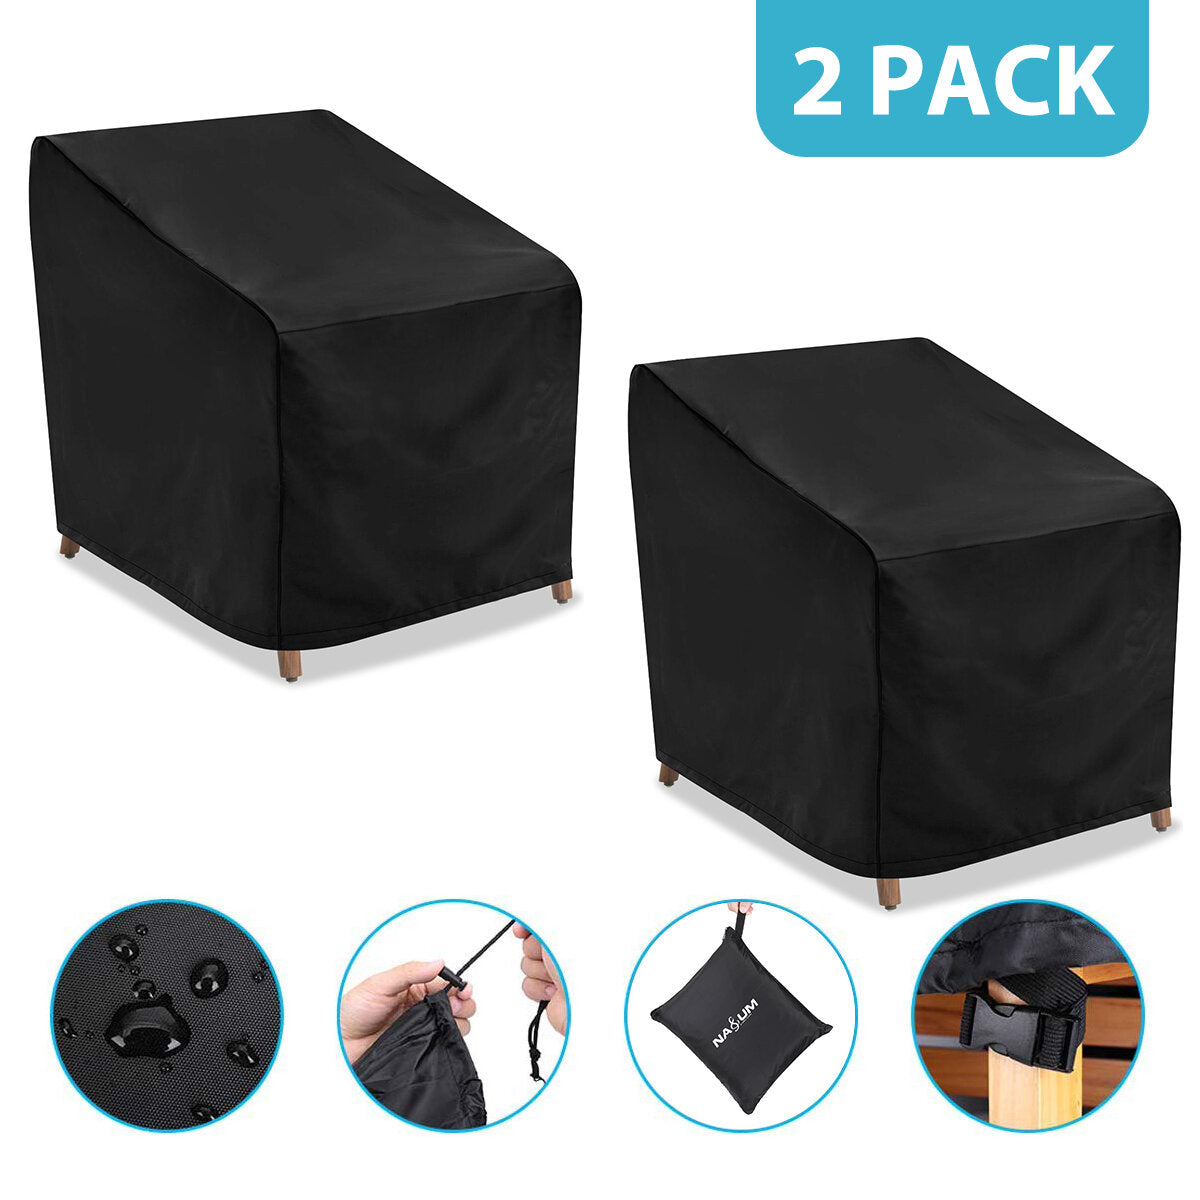 Chair Covers, Outdoor Lawn Patio Furniture Cover, Lounge Deep Outdoor Seat Cover, UV Protected with Waterproof - 38''L x 31''W x 29''H, 2 Pack, Black